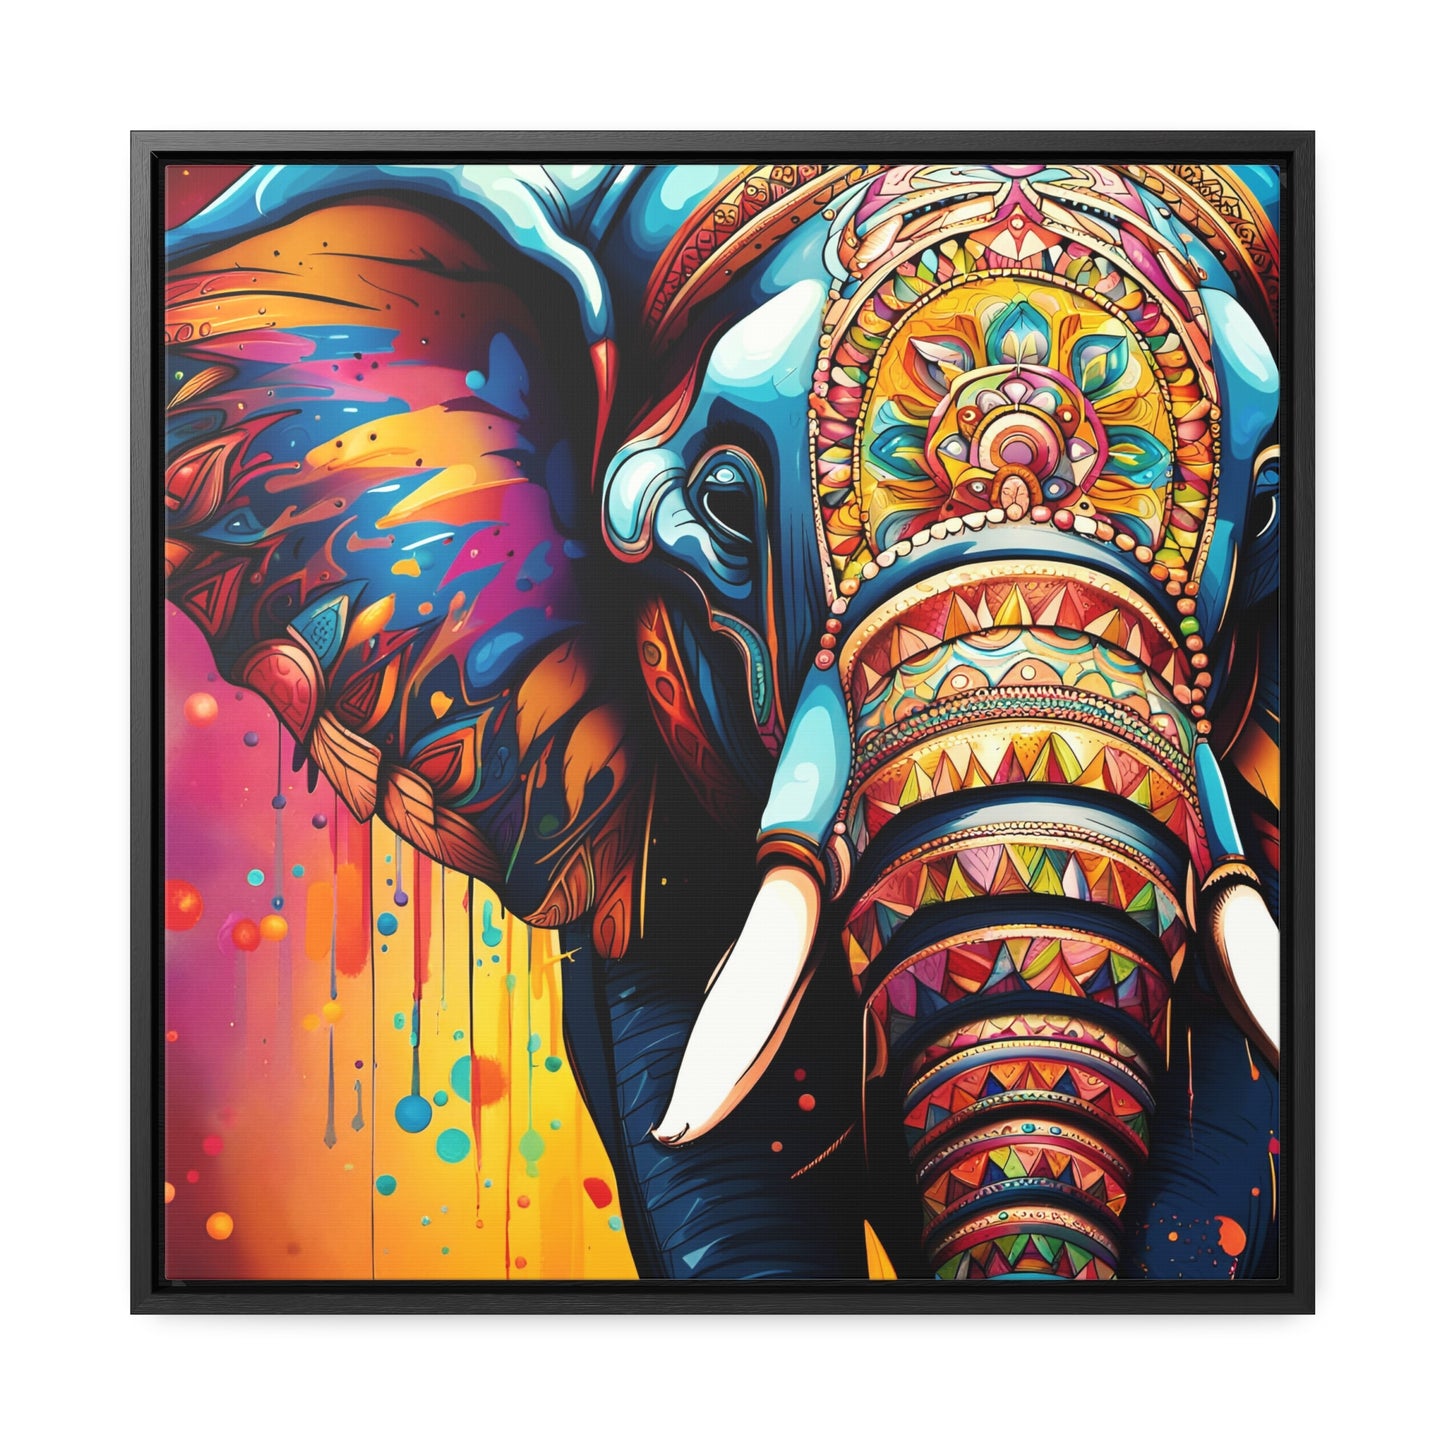 Elephant themed Wall Art Print - Stunning Multicolor Elephant Head Print on Canvas in a Floating Frame